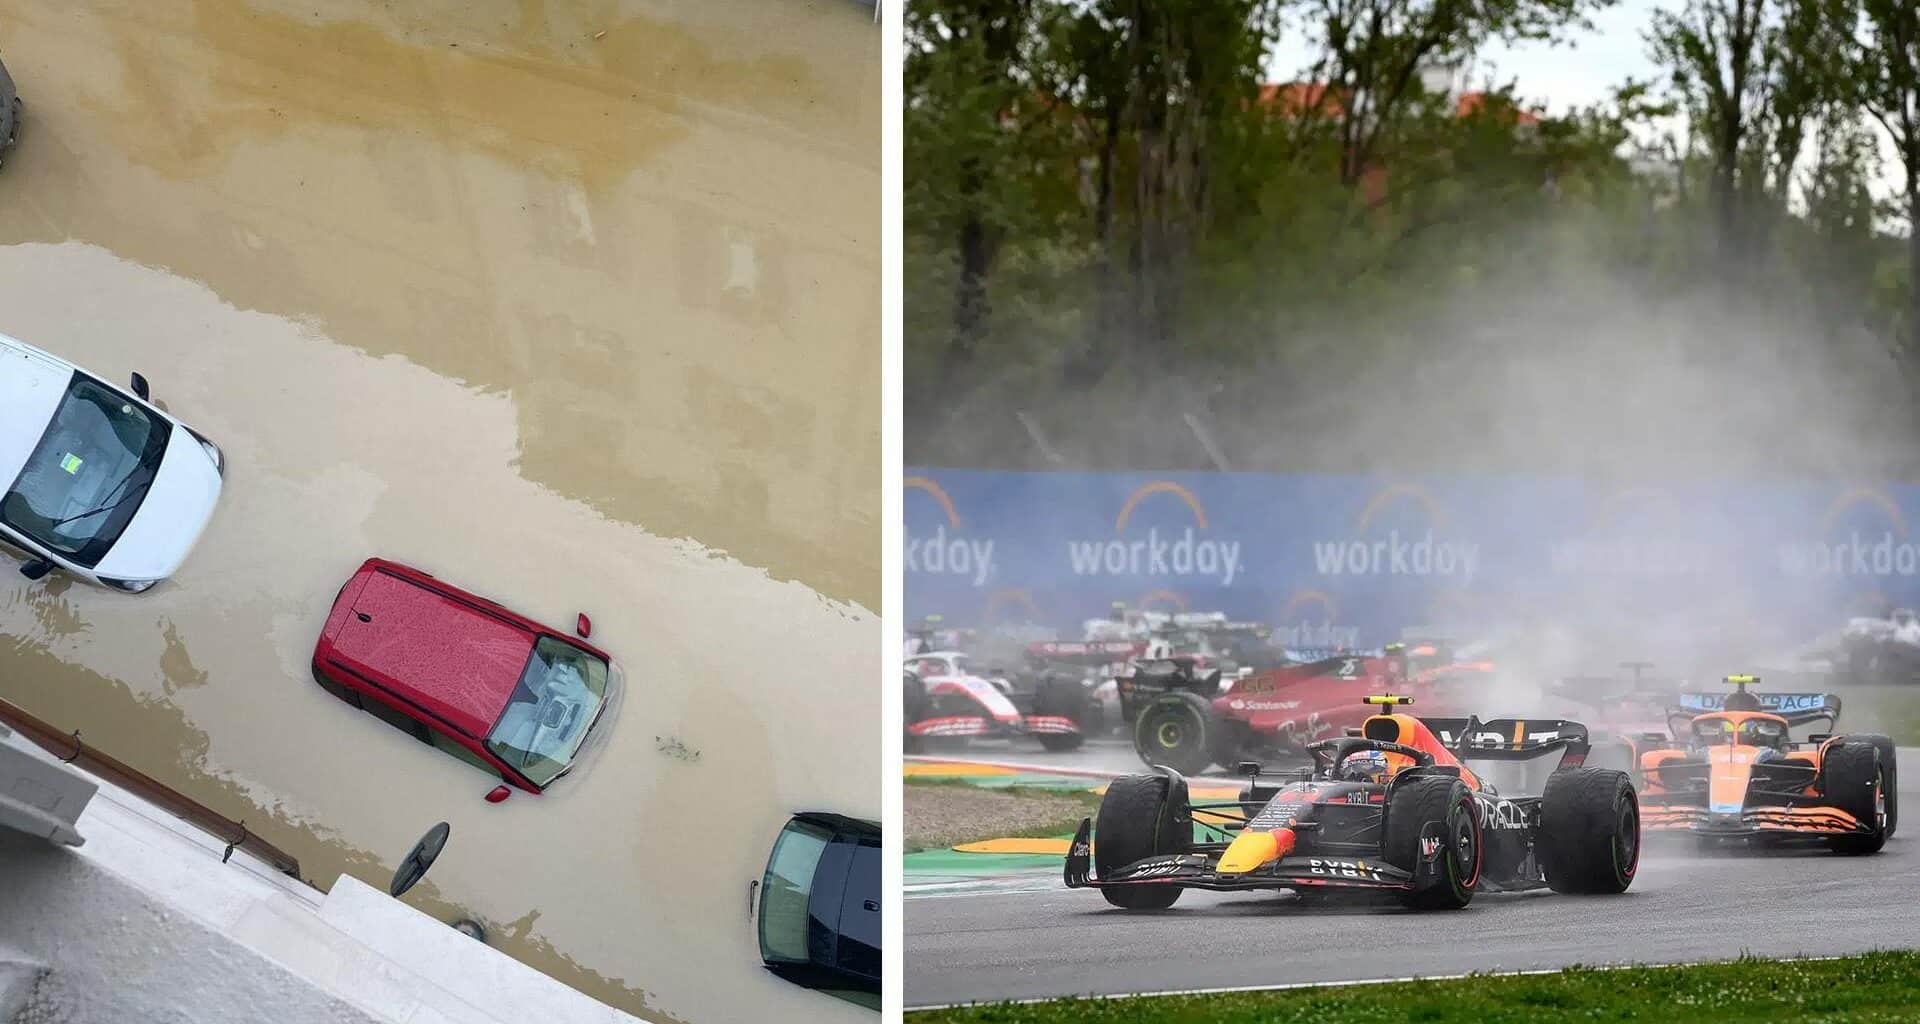 - Imola Grand prix Should Be Cancelled ! Opinion